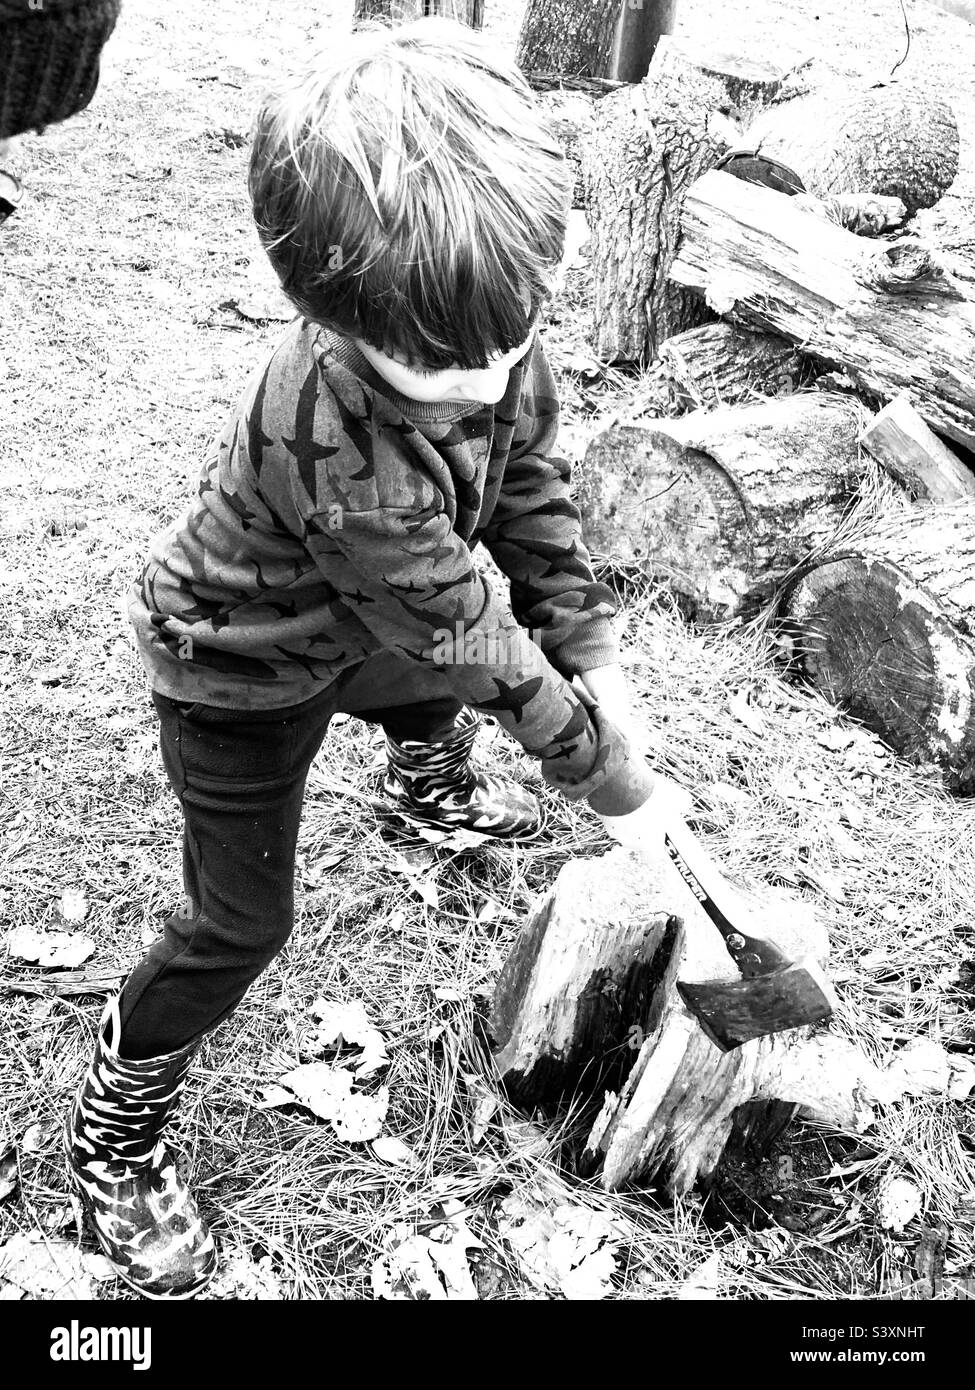 Boy chopping kindling for fireplace Stock Photo